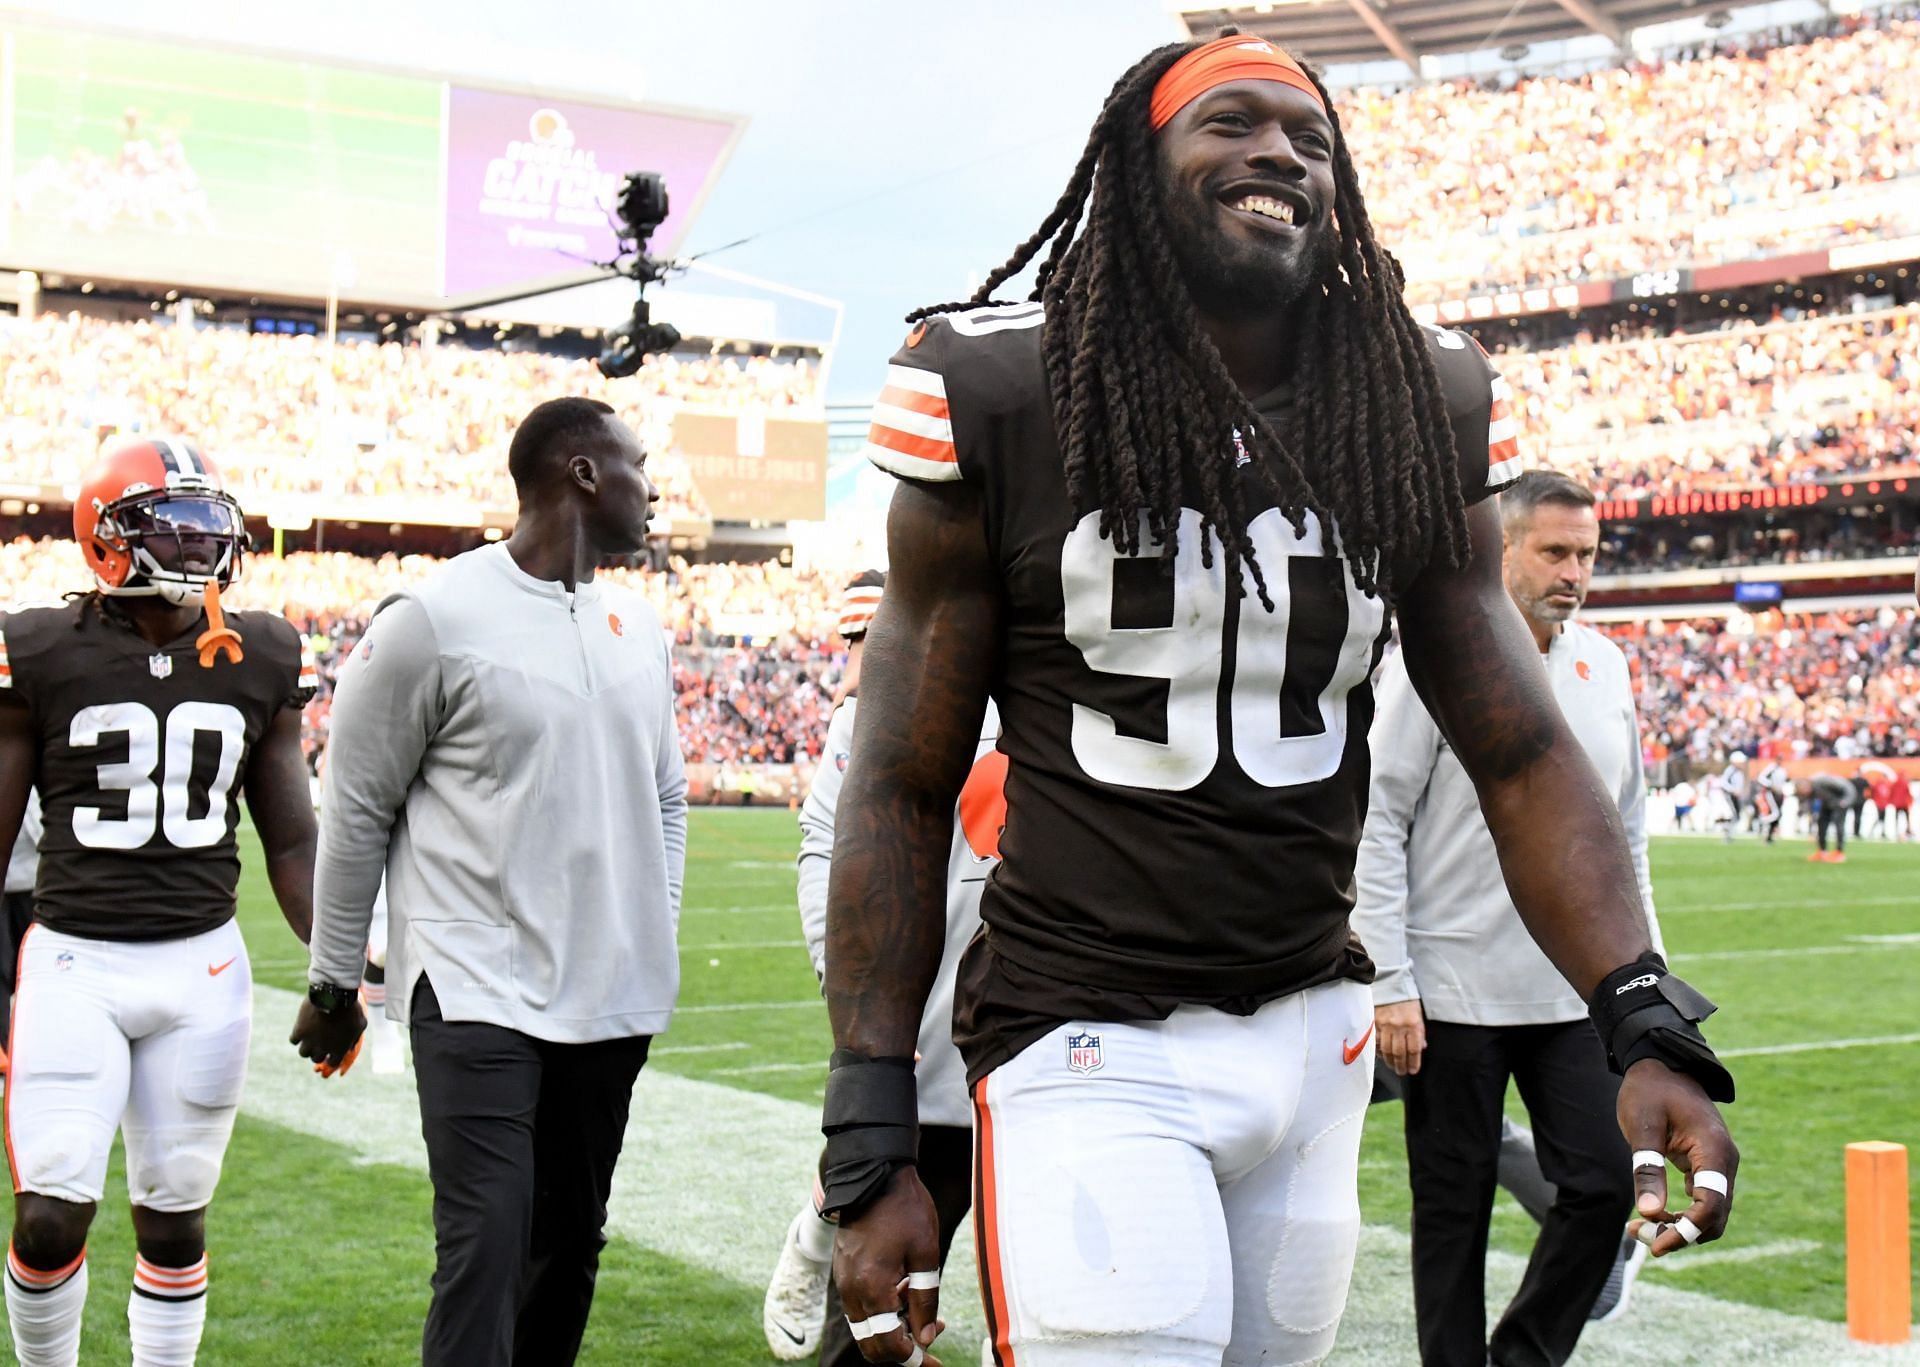 Jadeveon Clowney playing for the Cleveland Browns against the Arizona Cardinals